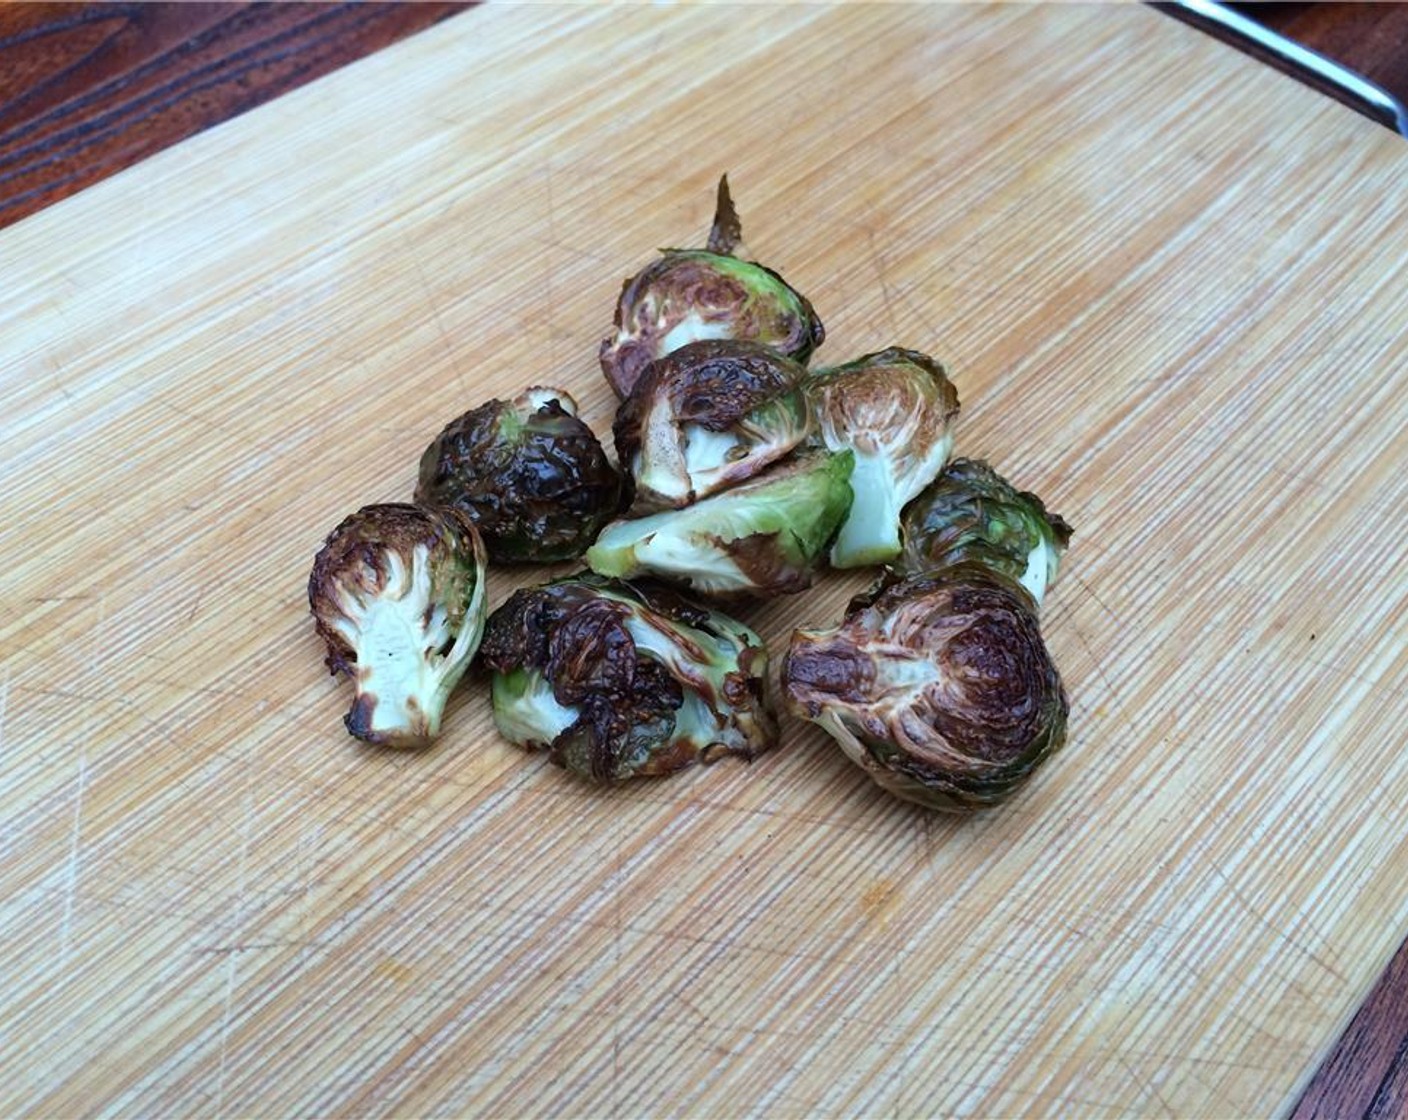 step 5 Toss the Brussels Sprouts with a bit of canola oil and roast them for 10 minutes. When nice and caramelized, remove and set aside to cool.